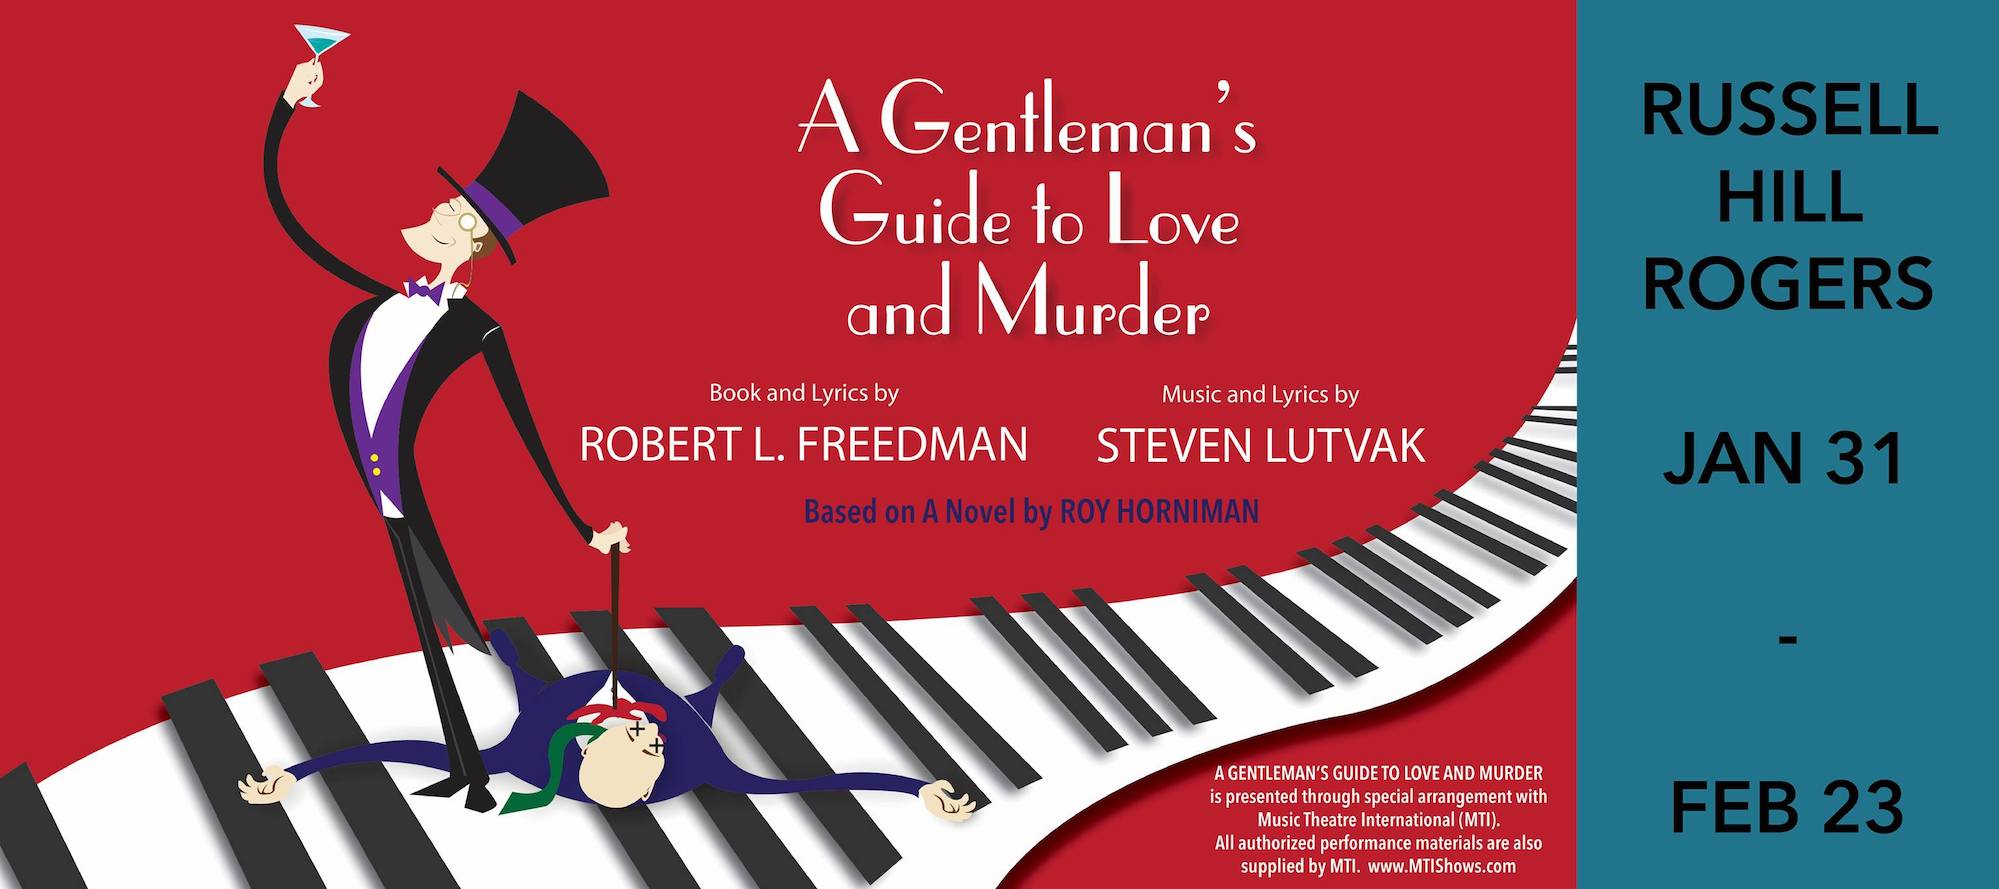 A Gentleman's Guide to Love and Murder by The Public Theater